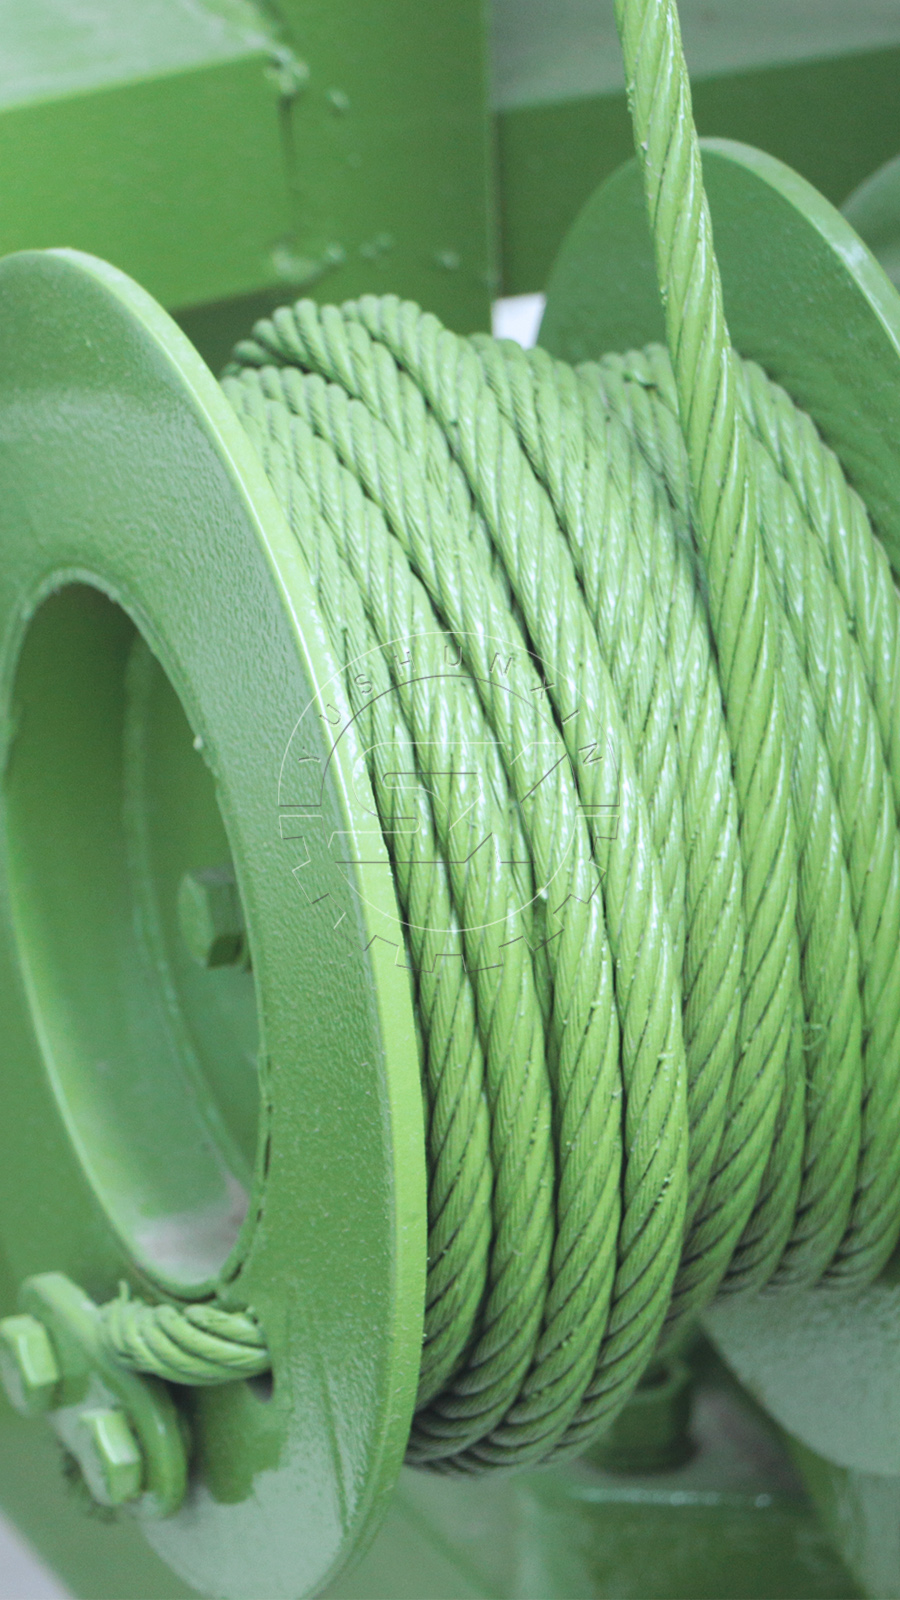 The Cable of BB fertilizer Mixer's Feeder